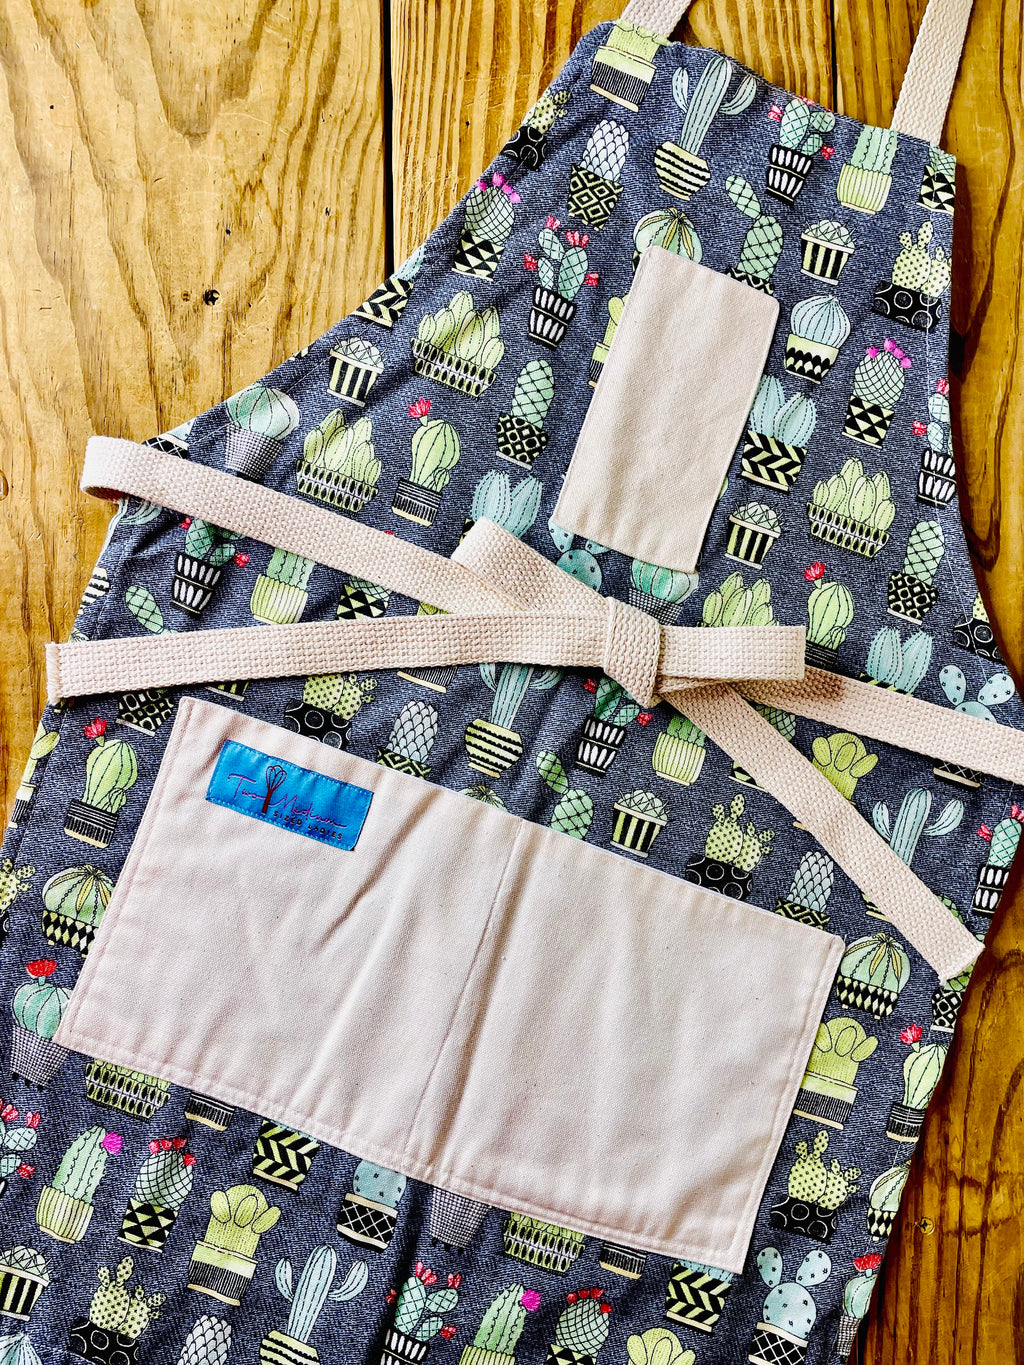 Ranchy Life Chloe Catcus cotton apron by Two Medium Sized Ladies